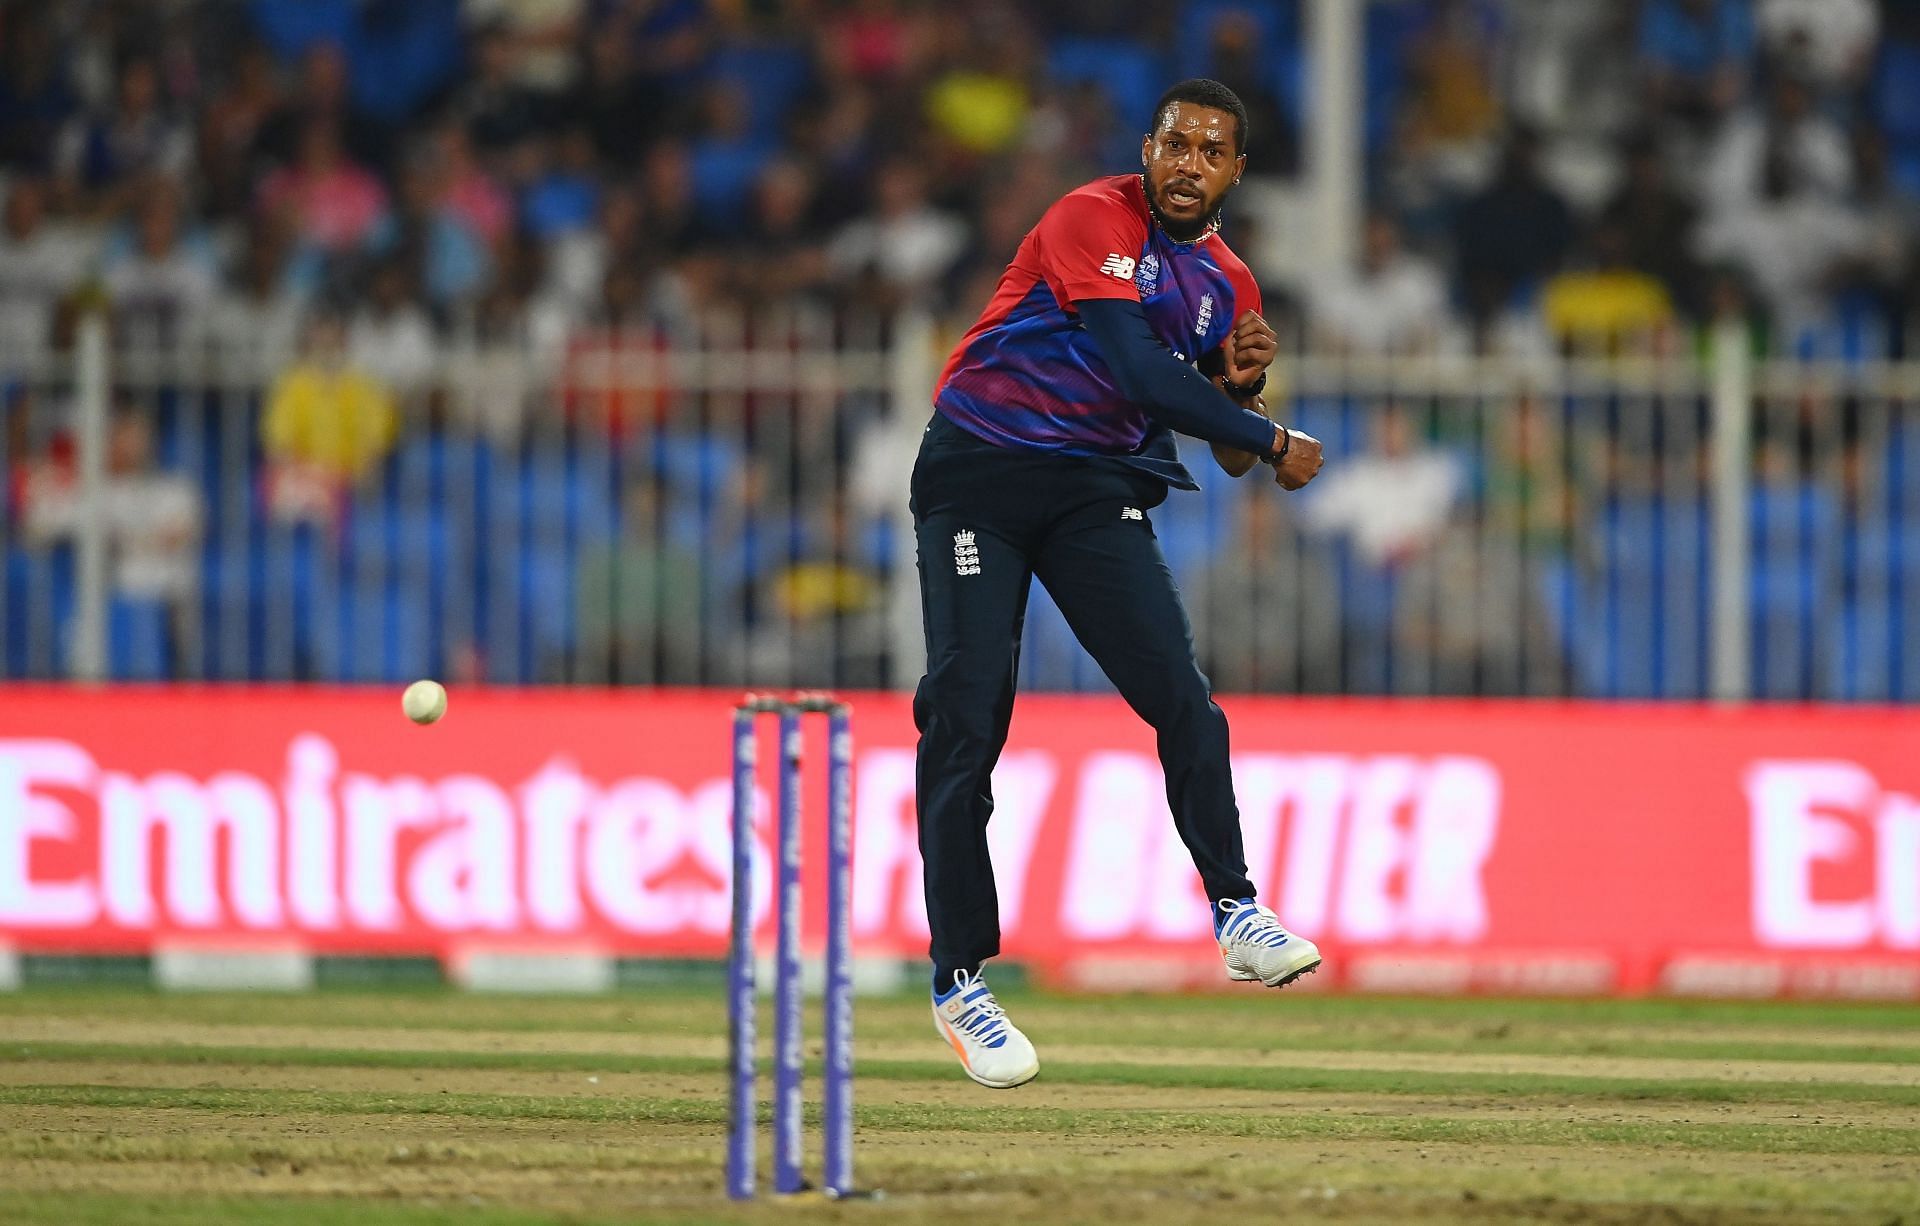 Chris Jordan couldn&#039;t live up to the expectations in the semi-final. (Image Credits: Getty)